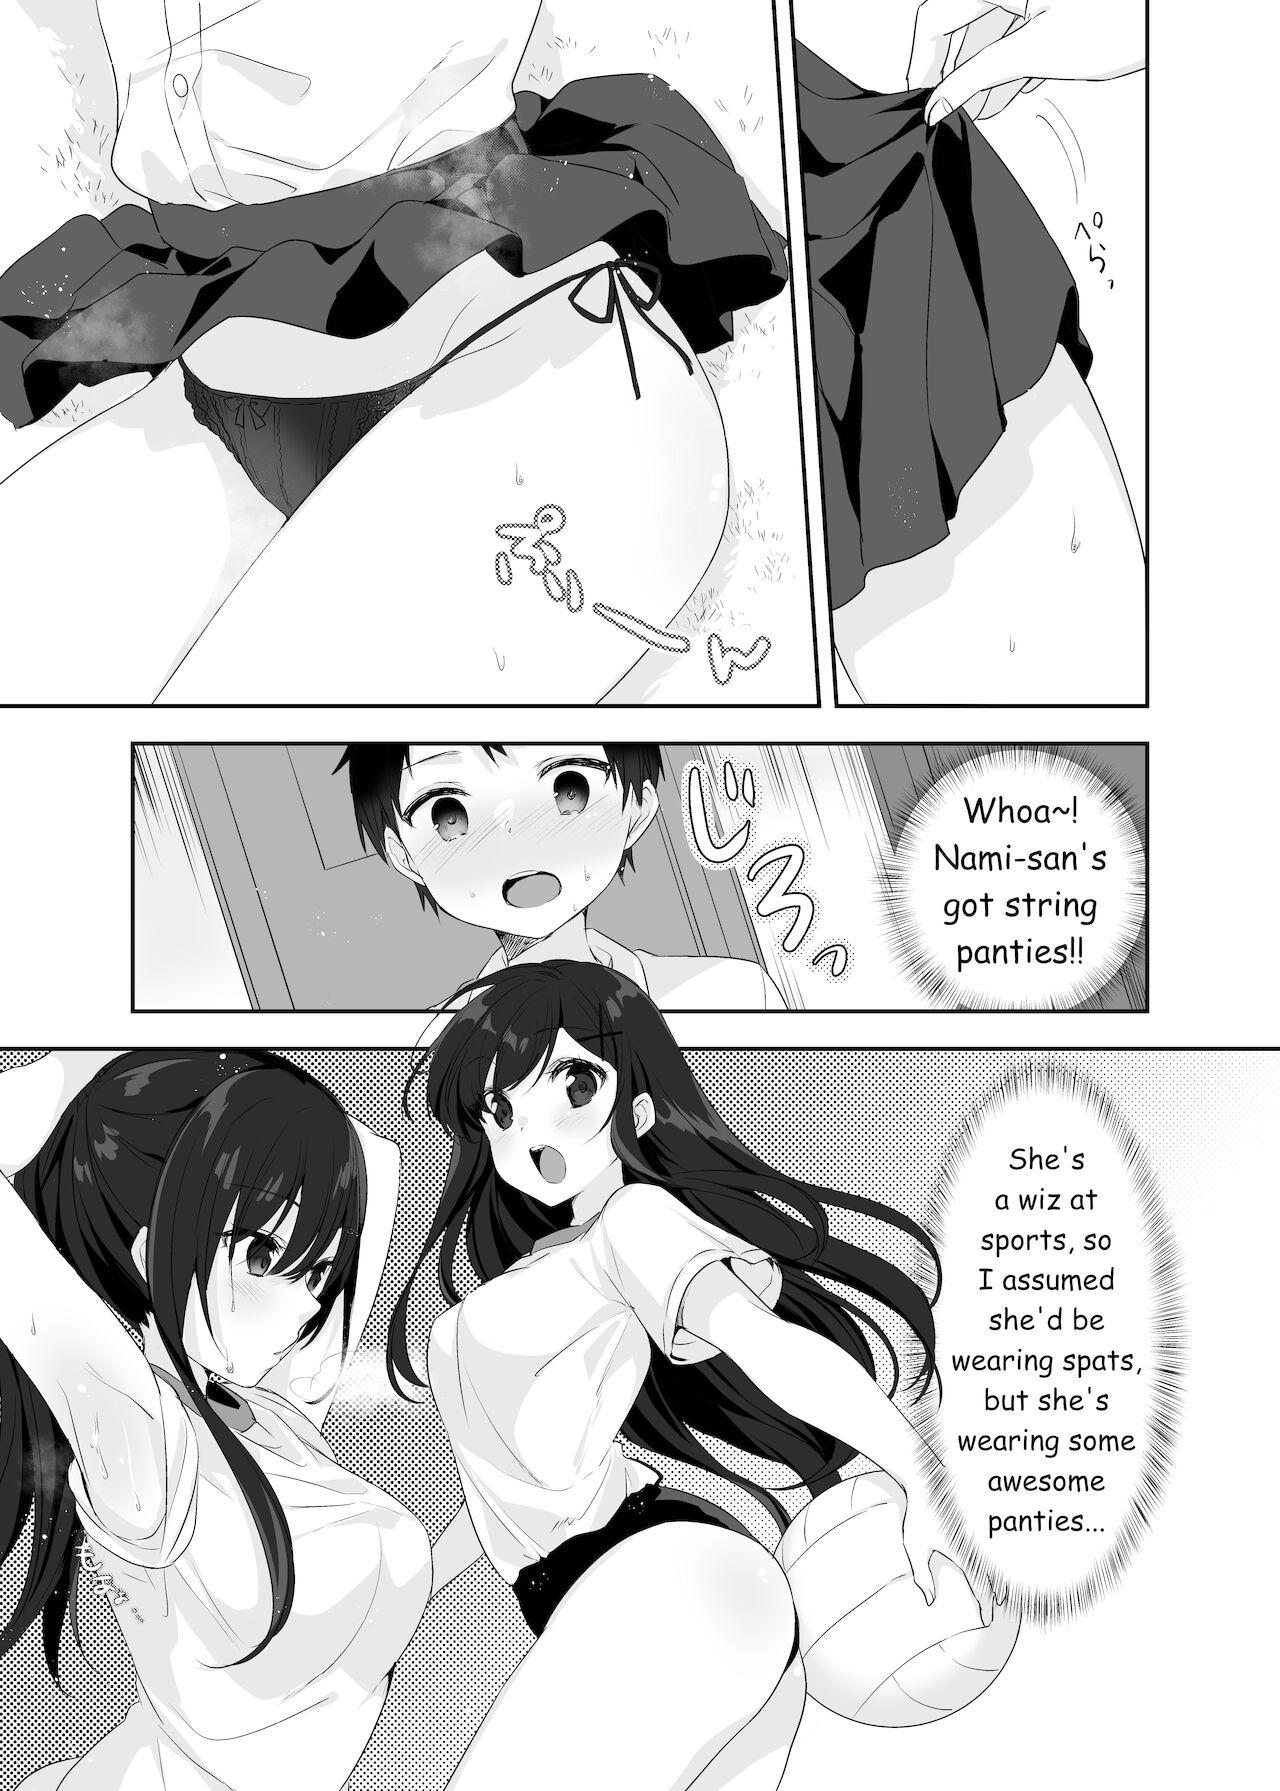 Cams Boku no Onee-chan to Tomodachi wo Nemurasete Osottemitara Kaeriuchi ni Atta | The Tables were Turned when I tried to Rape my Sister and her Friends while they were Asleep Spreadeagle - Page 5